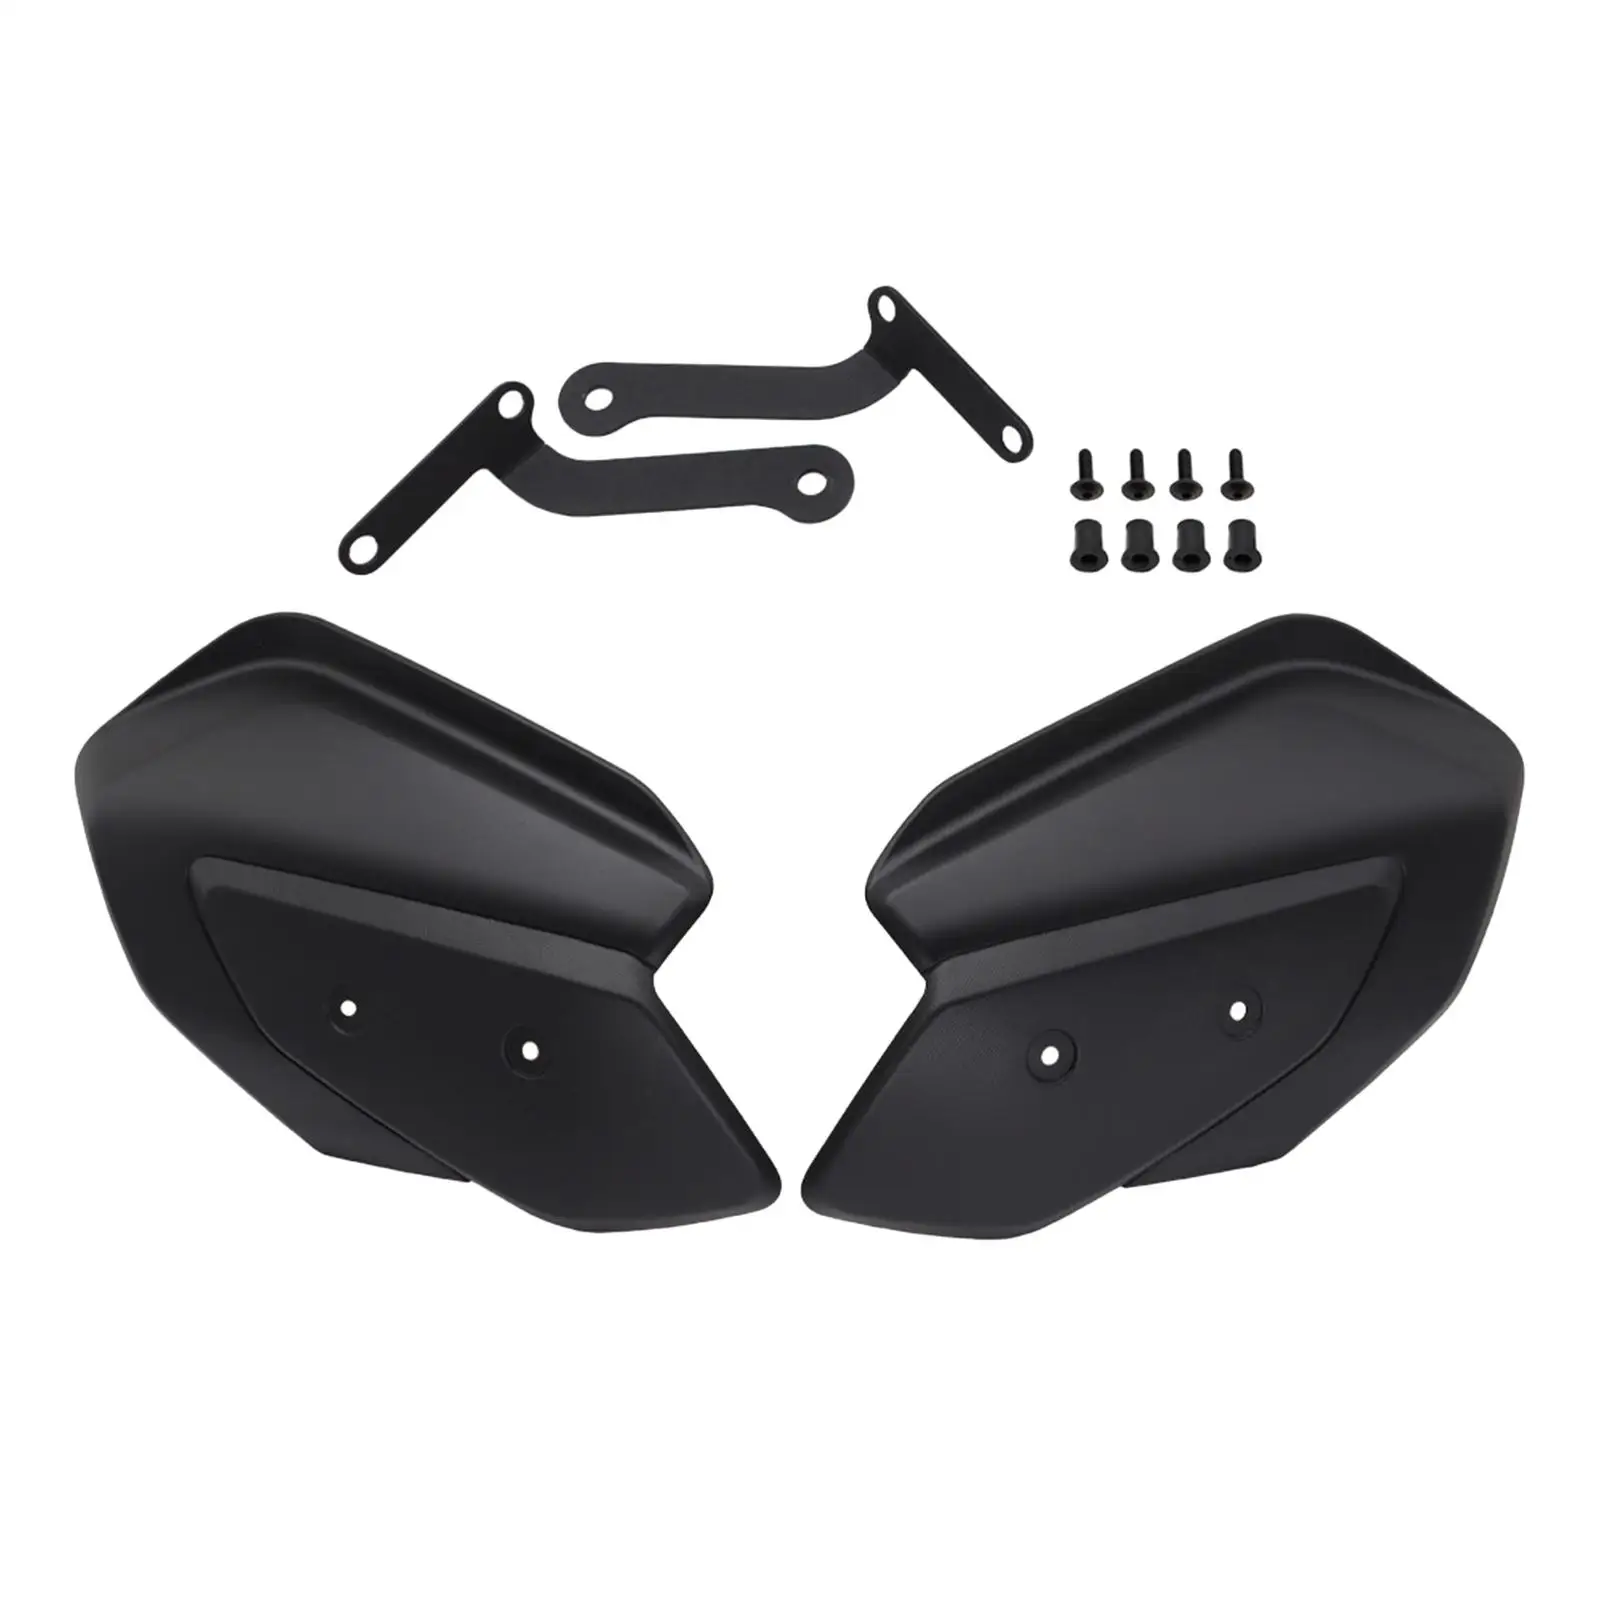 2 Pieces Motorcycle Handguards Handle Bar Guard Protector for Xmax 125